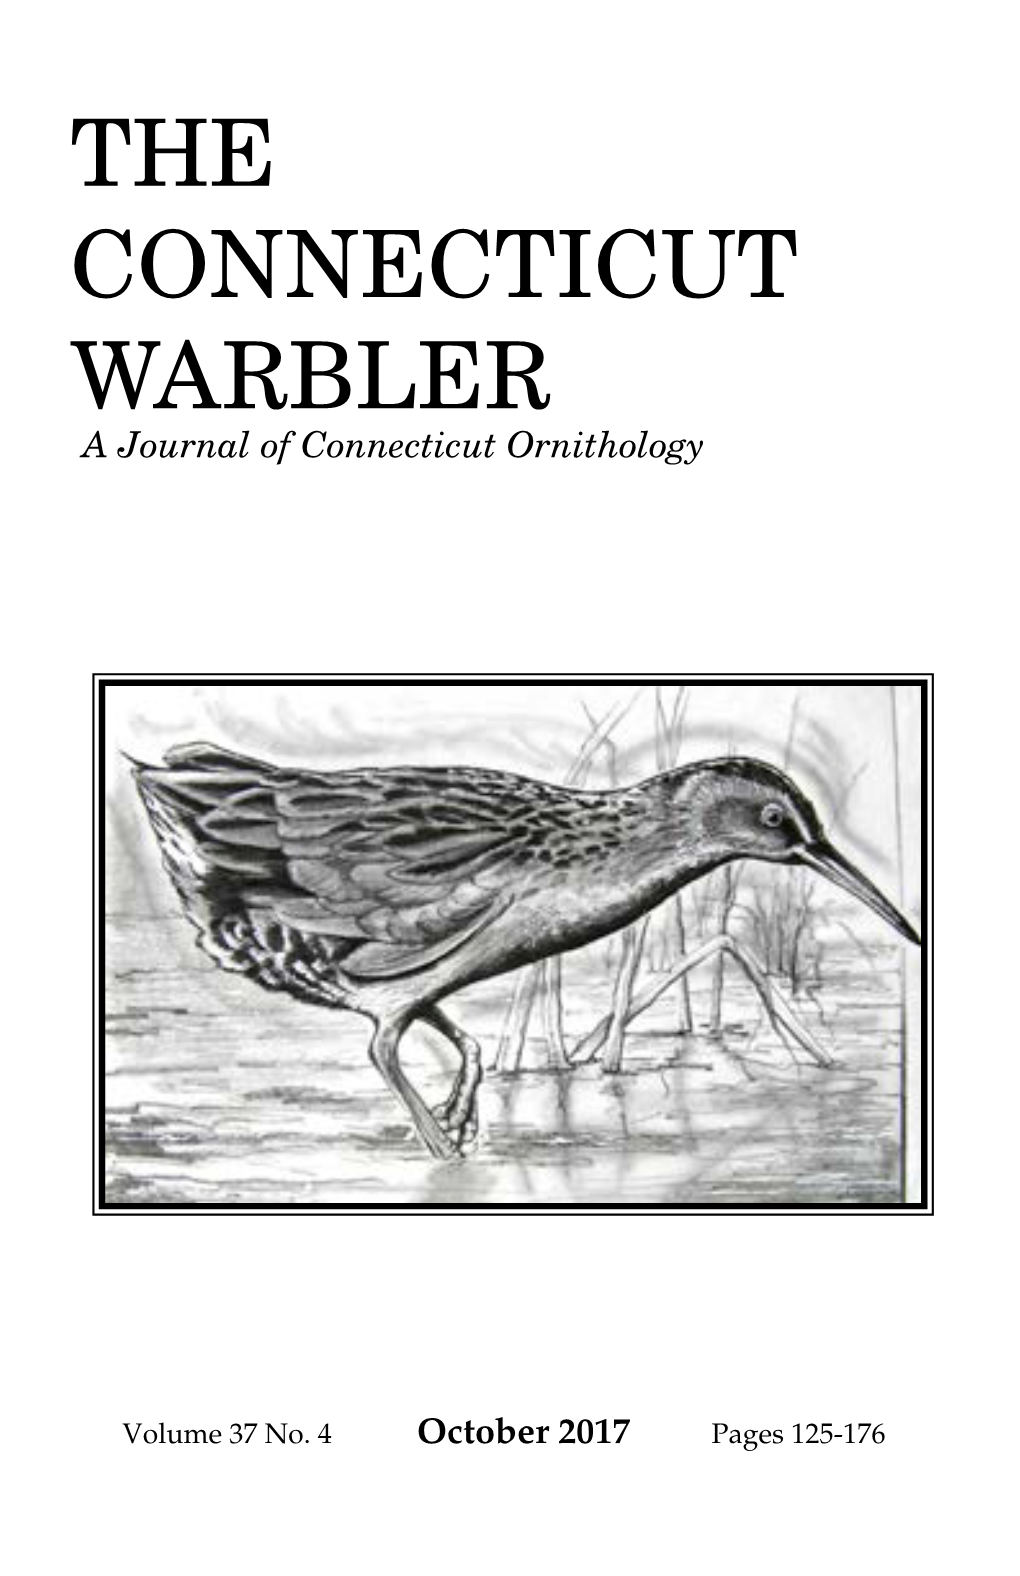 THE CONNECTICUT WARBLER a Journal of Connecticut Ornithology